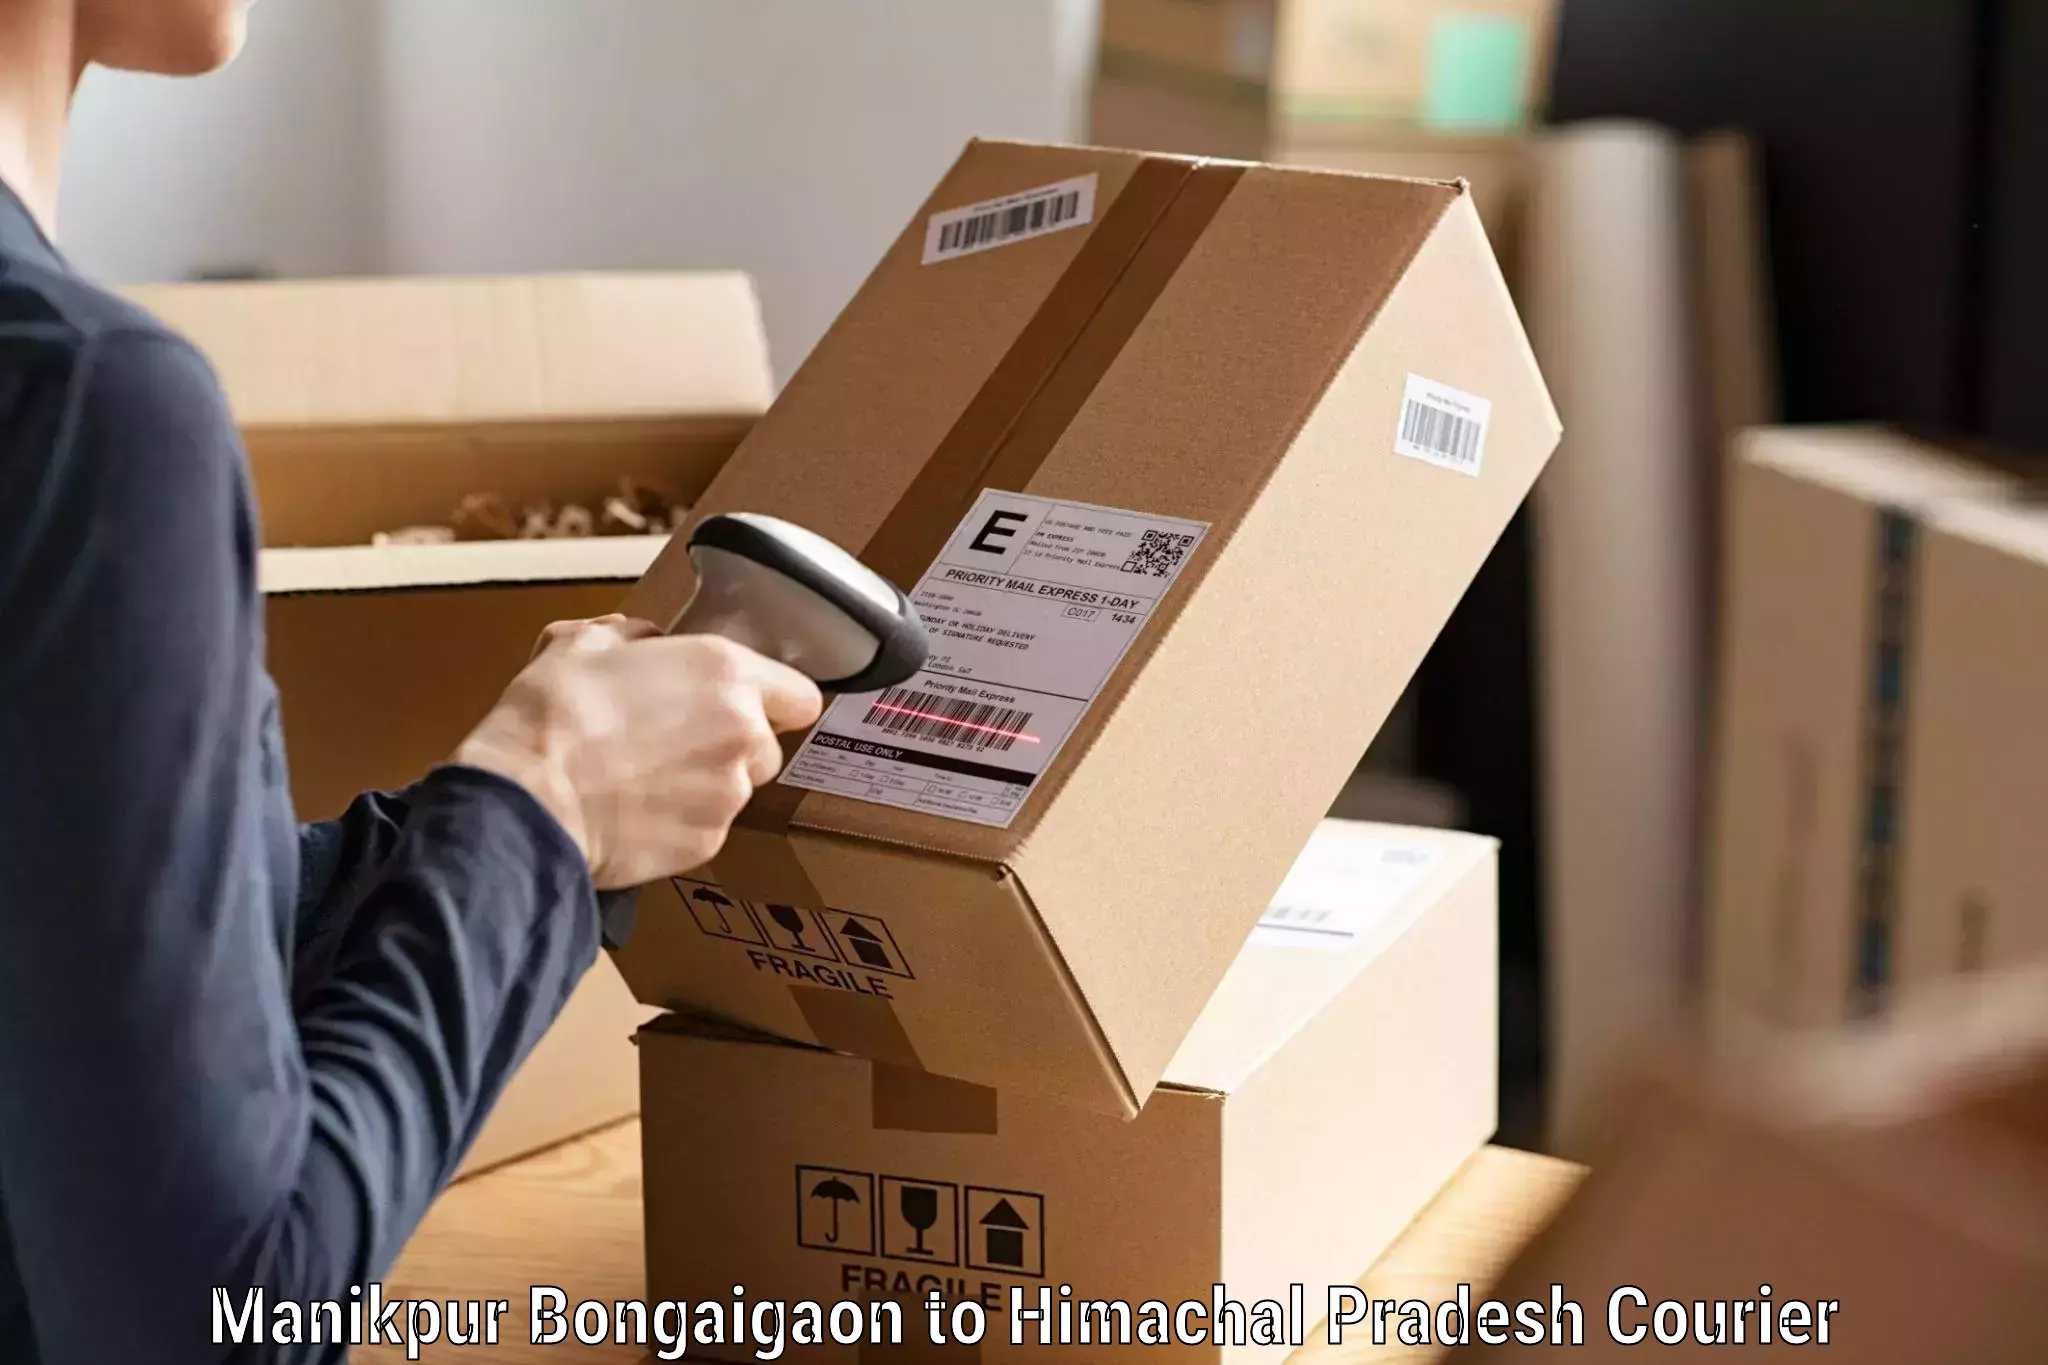 Business courier solutions Manikpur Bongaigaon to Dalhousie